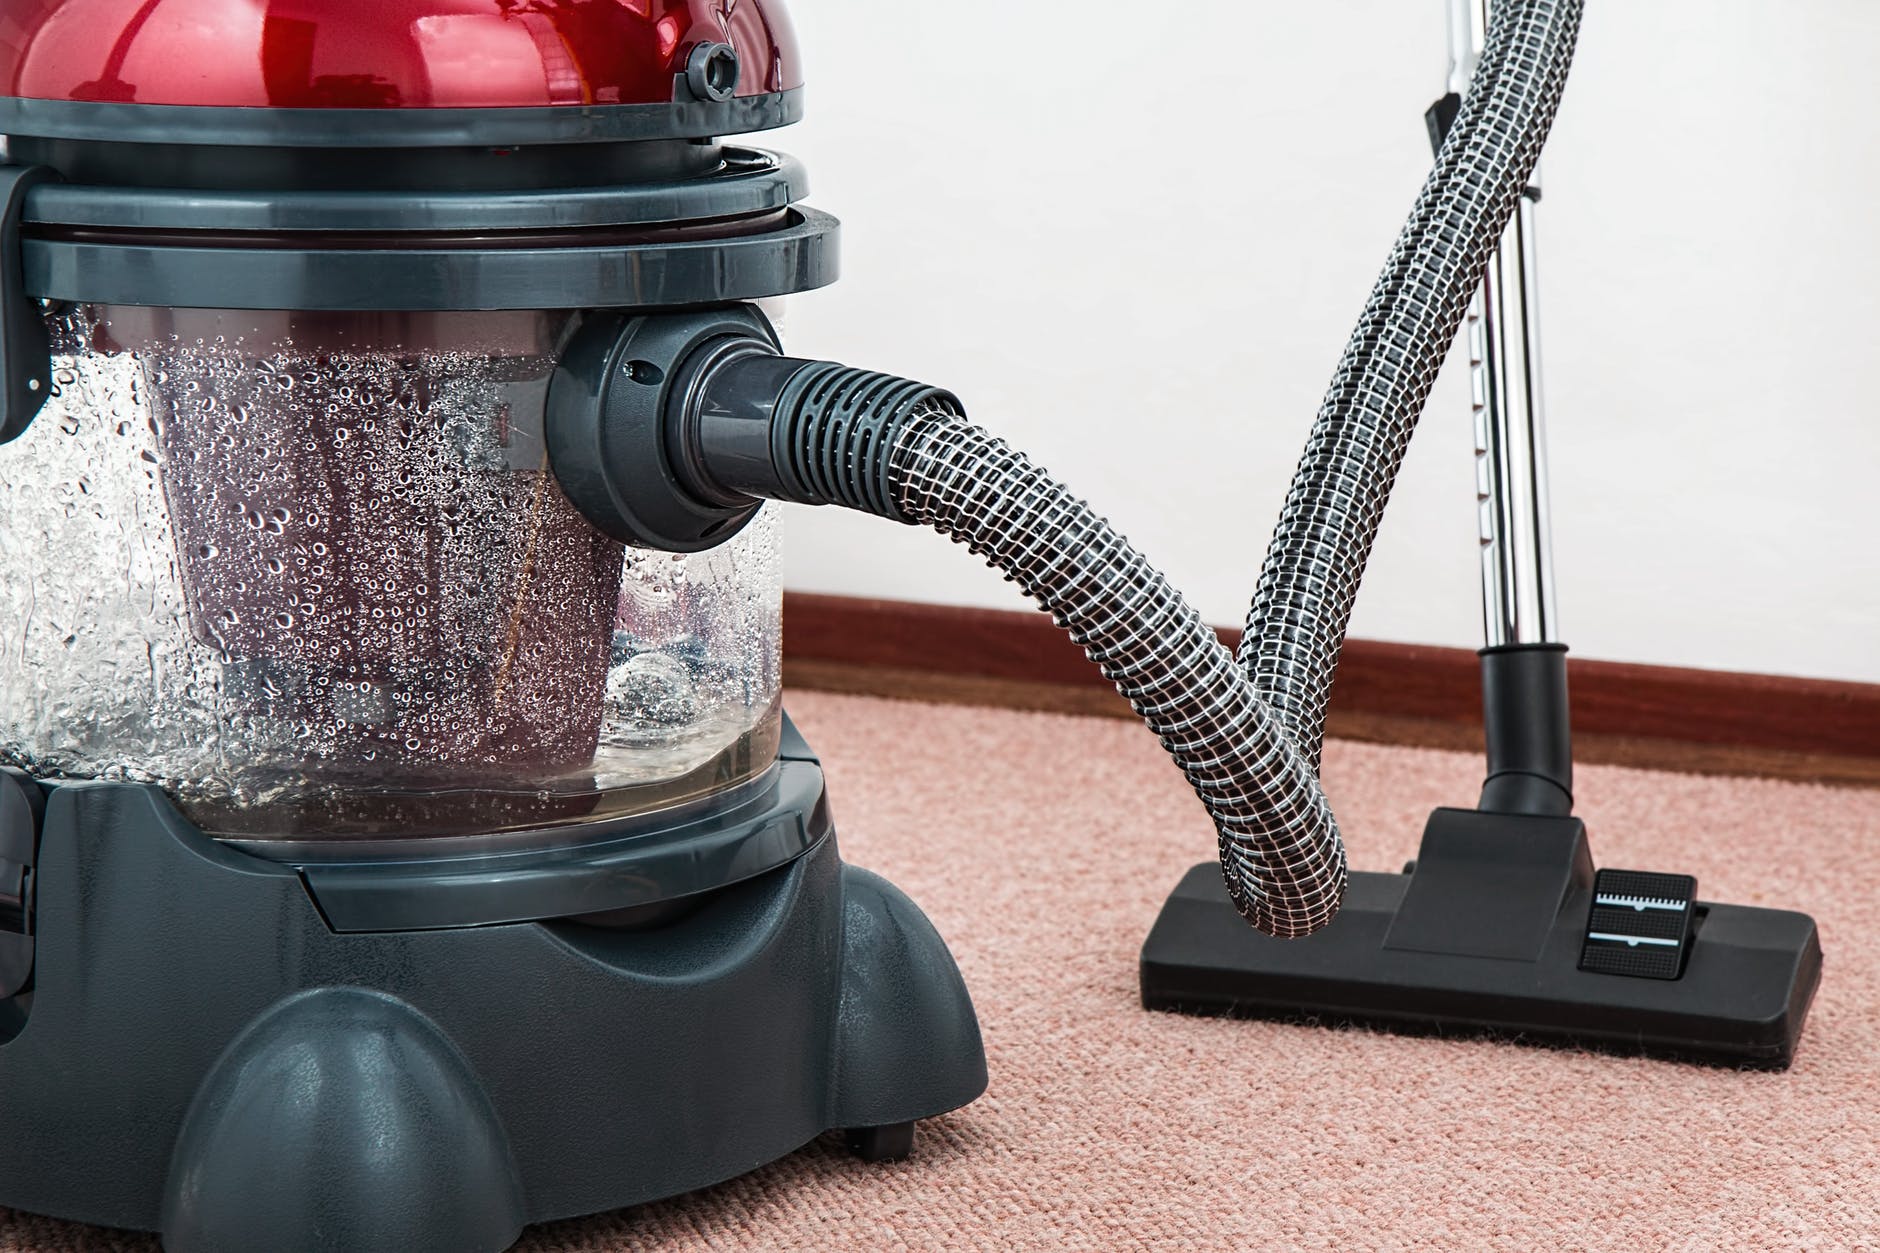 Exceptional Carpet Care - Carpet Cleaning Services in Rochester, MN